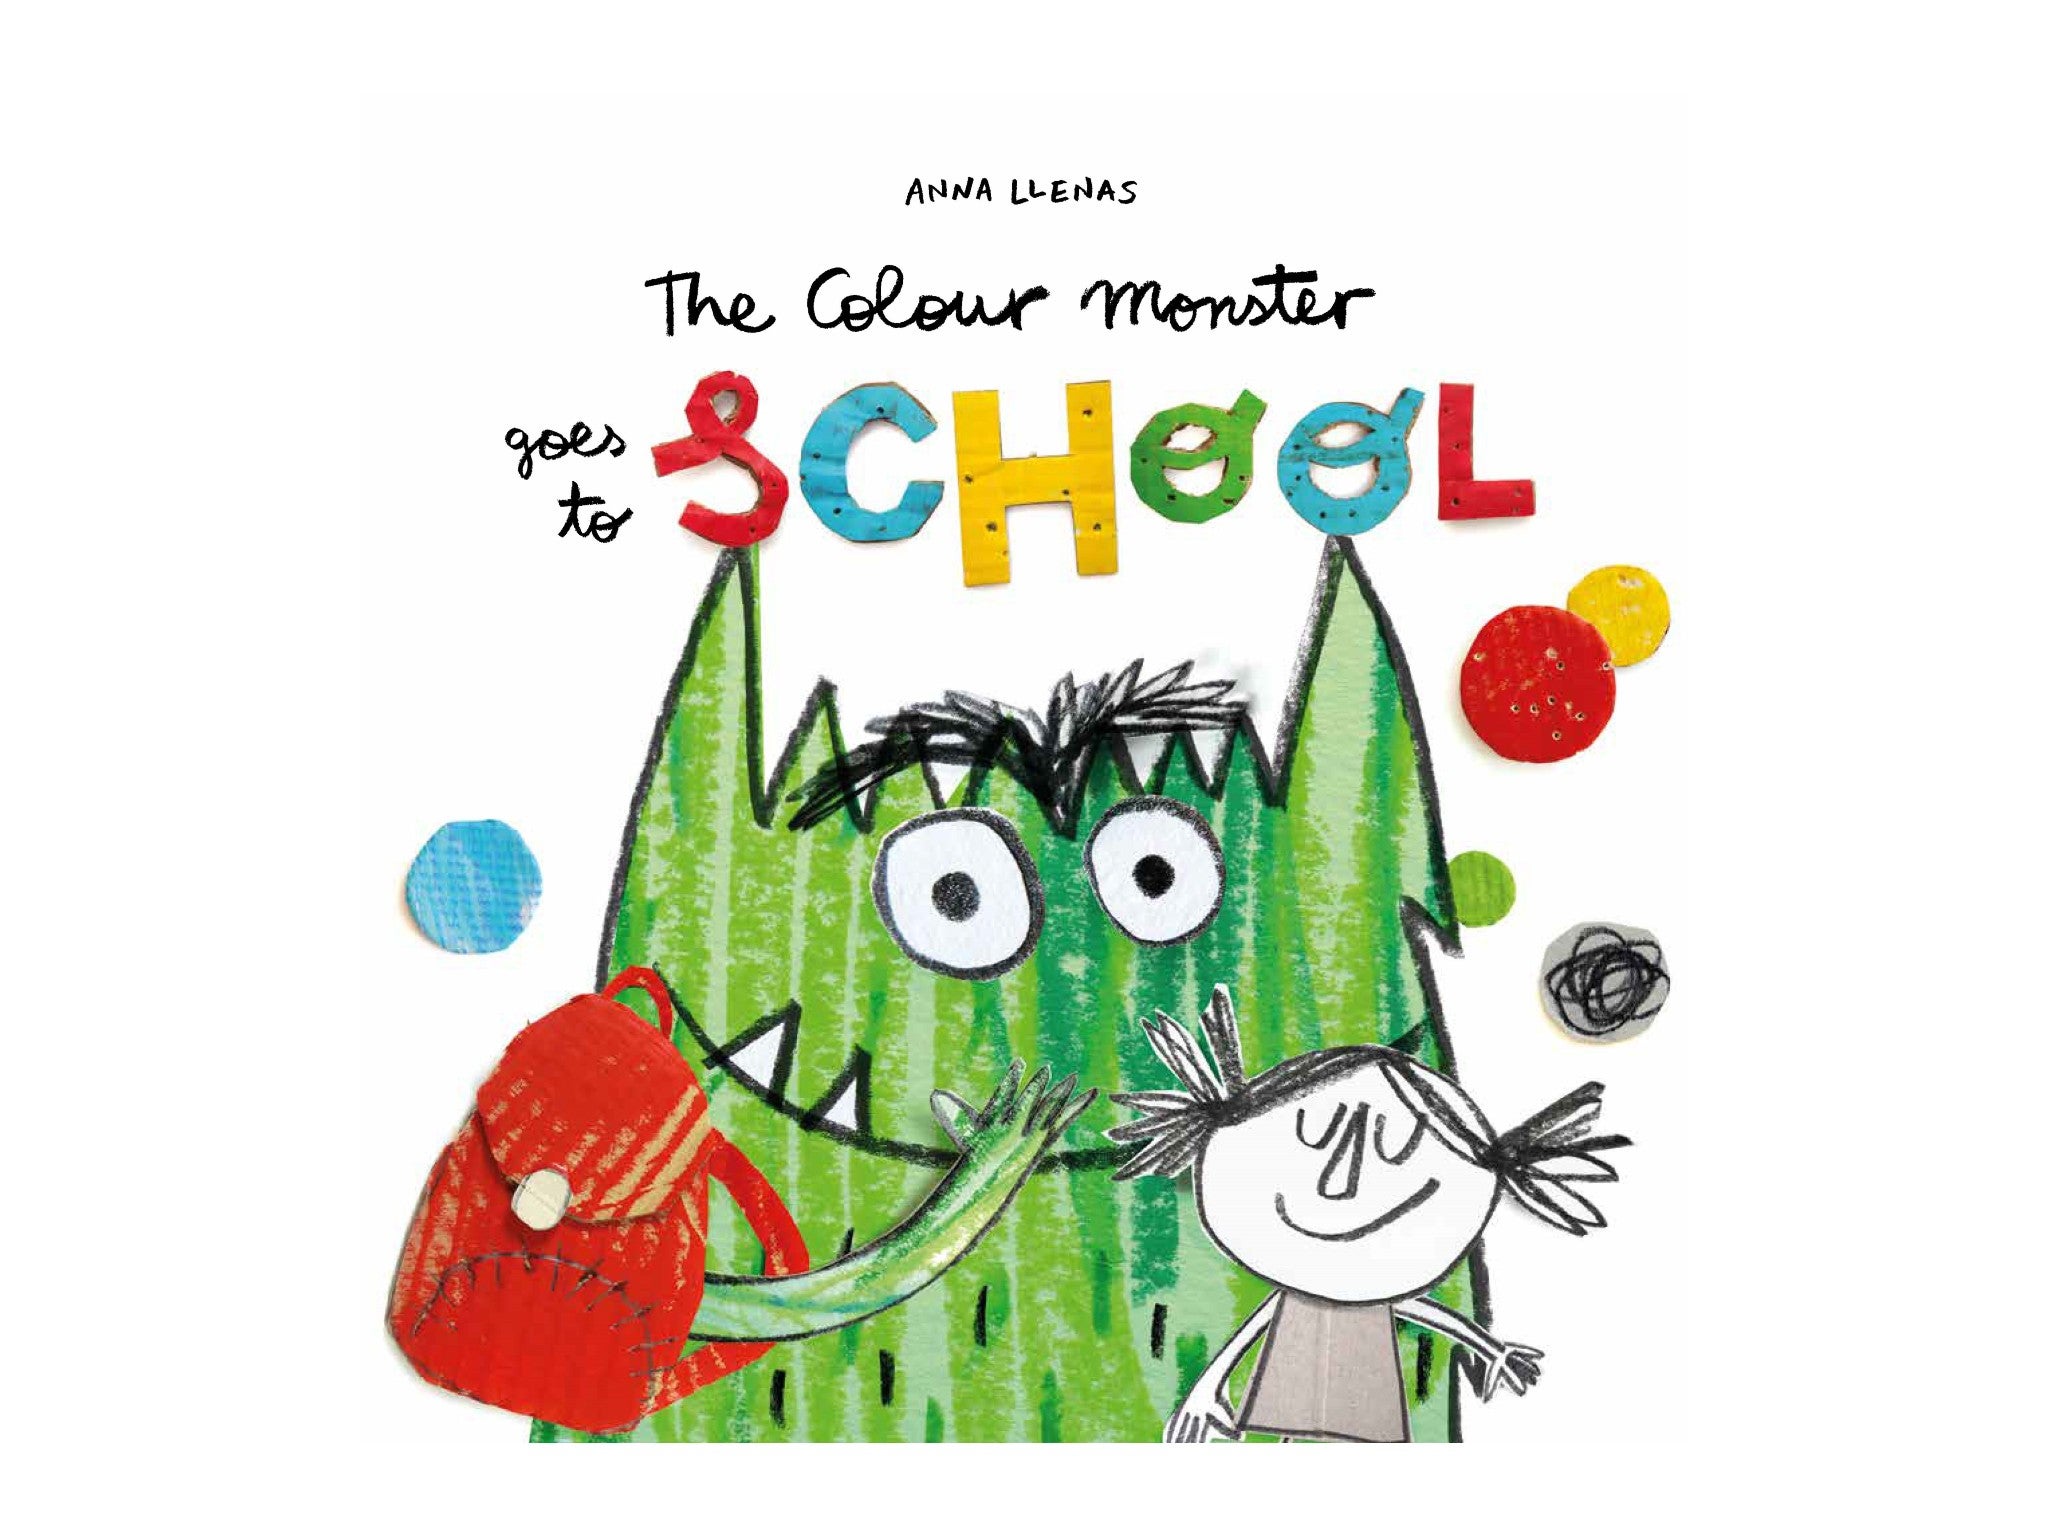 The Colour Monster Goes to School by Anna Llenas, published by Templar Books indybest.jpeg